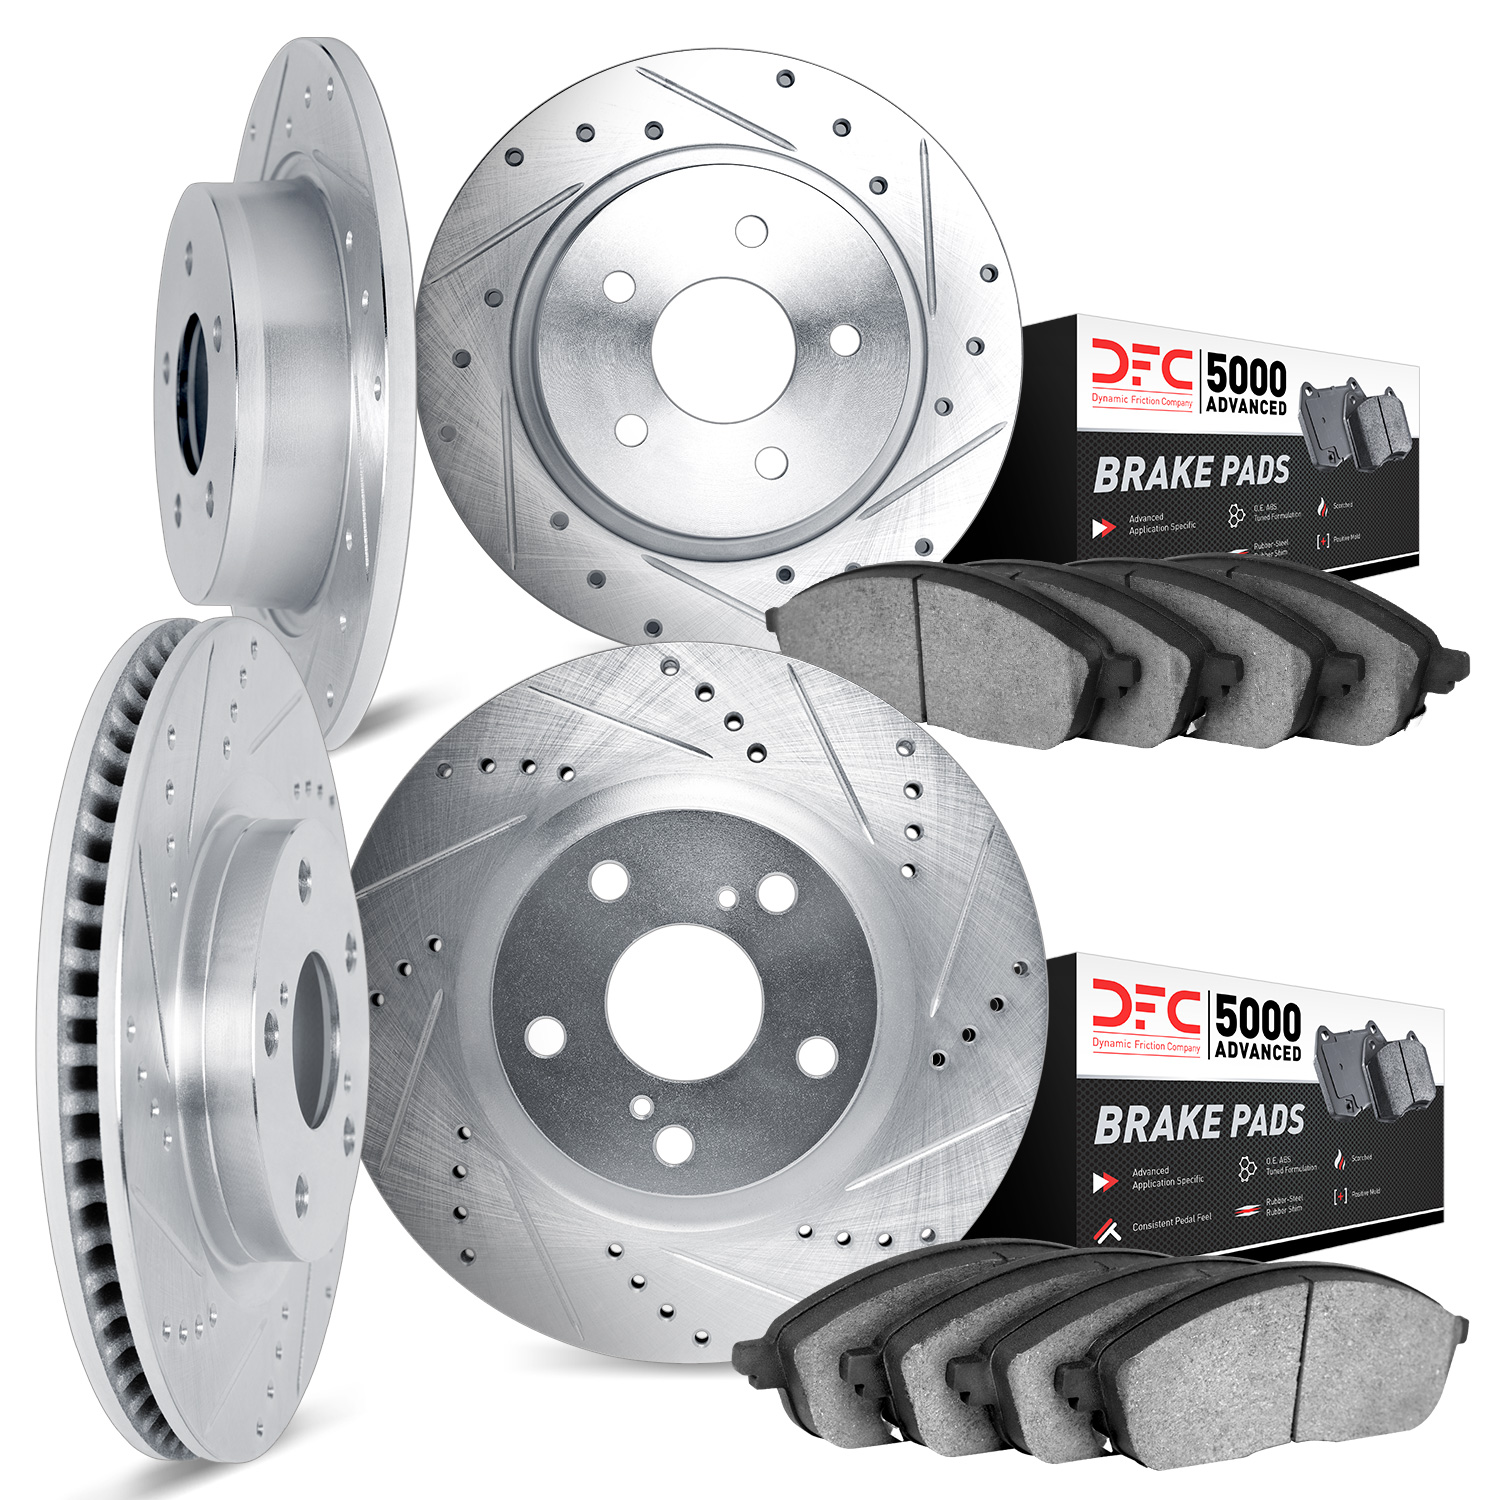 7504-40218 Drilled/Slotted Brake Rotors w/5000 Advanced Brake Pads Kit [Silver], 1987-1988 Mopar, Position: Front and Rear